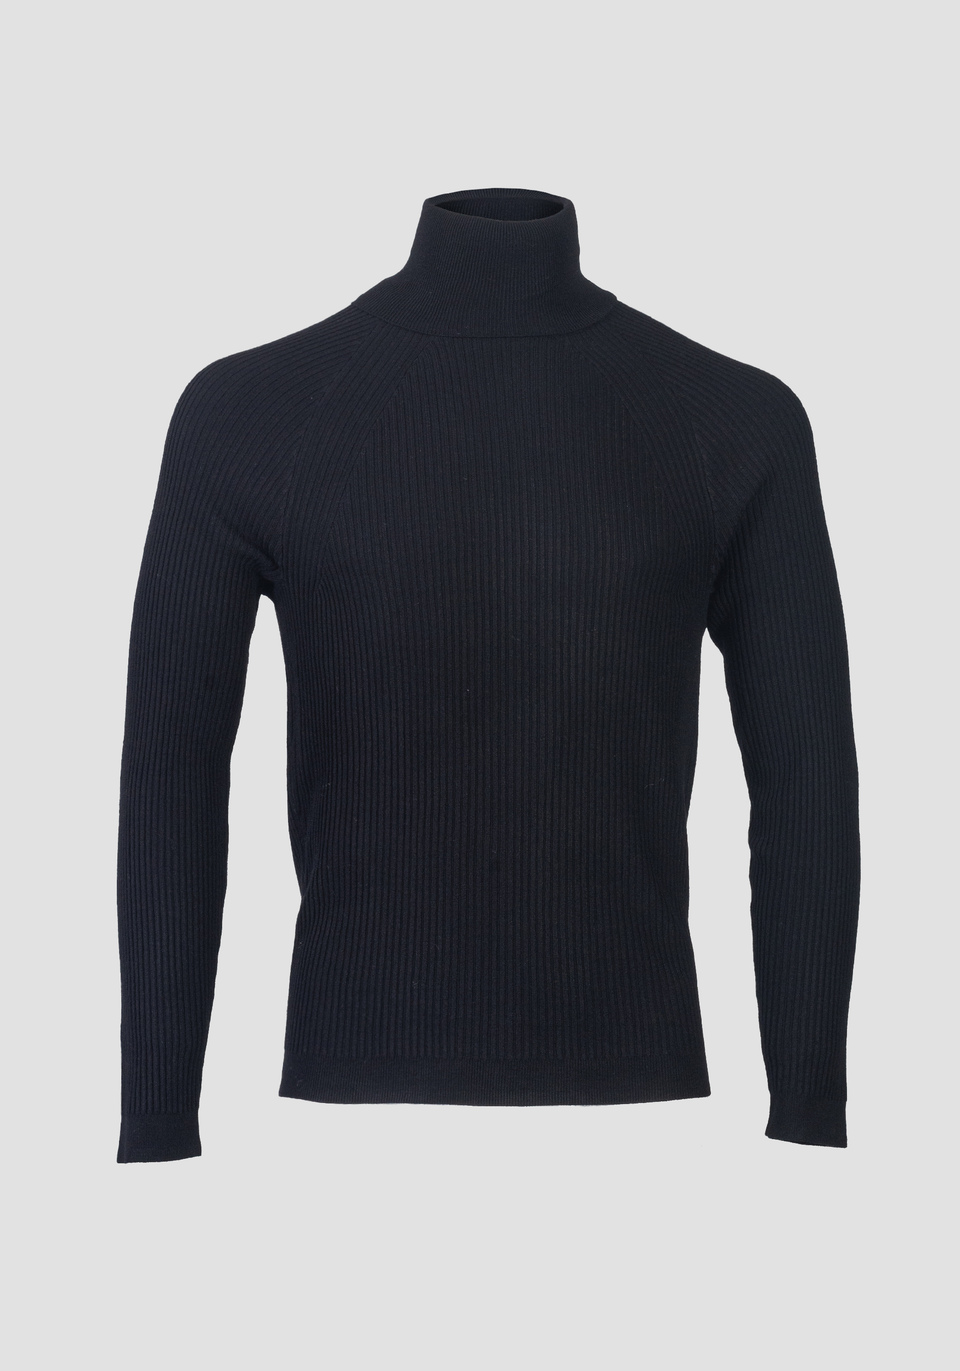 HIHG-NECK SWEATER WITH RIBBED PROCESSING - Antony Morato Online Shop